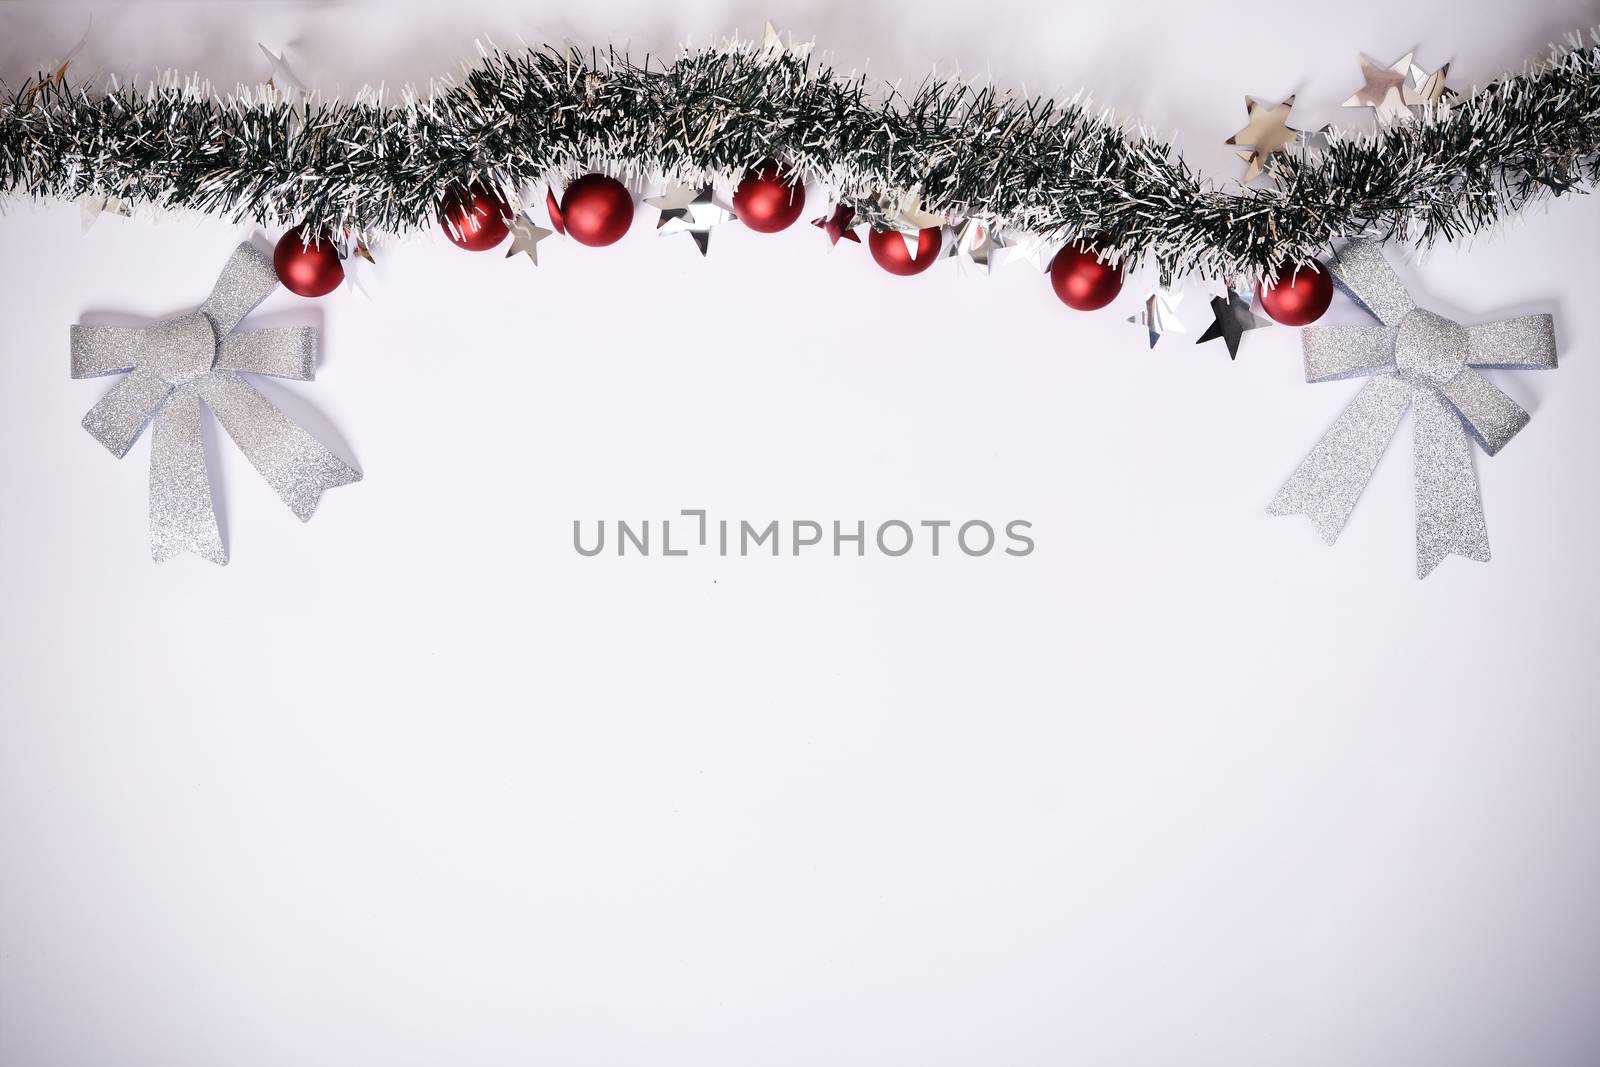 Seasonal composition with garland and glittery bows by Mendelex